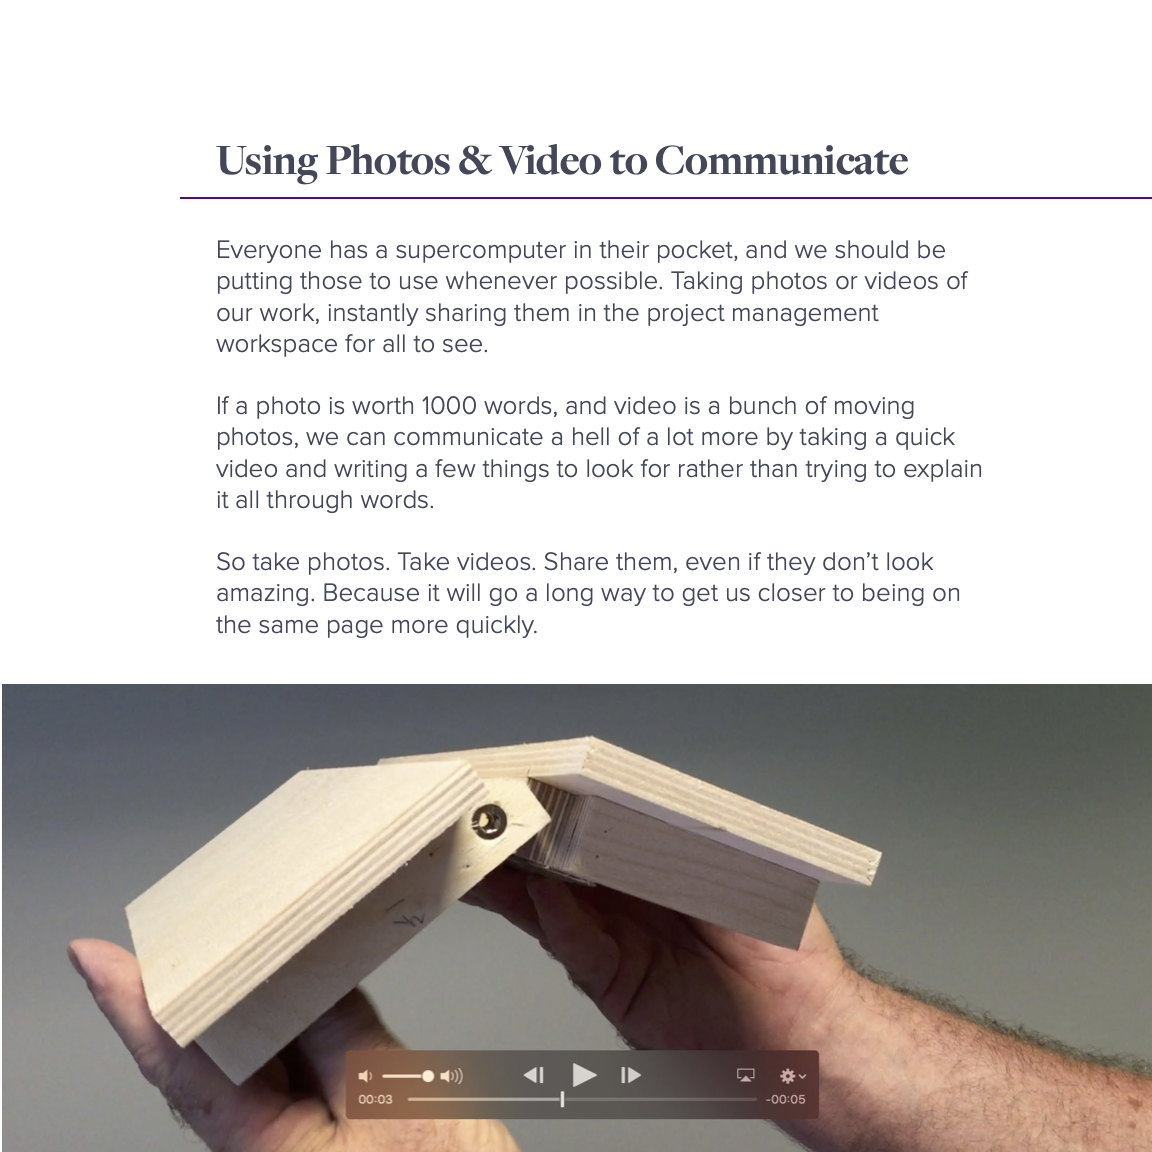 Use Photos and Videos to Communicate